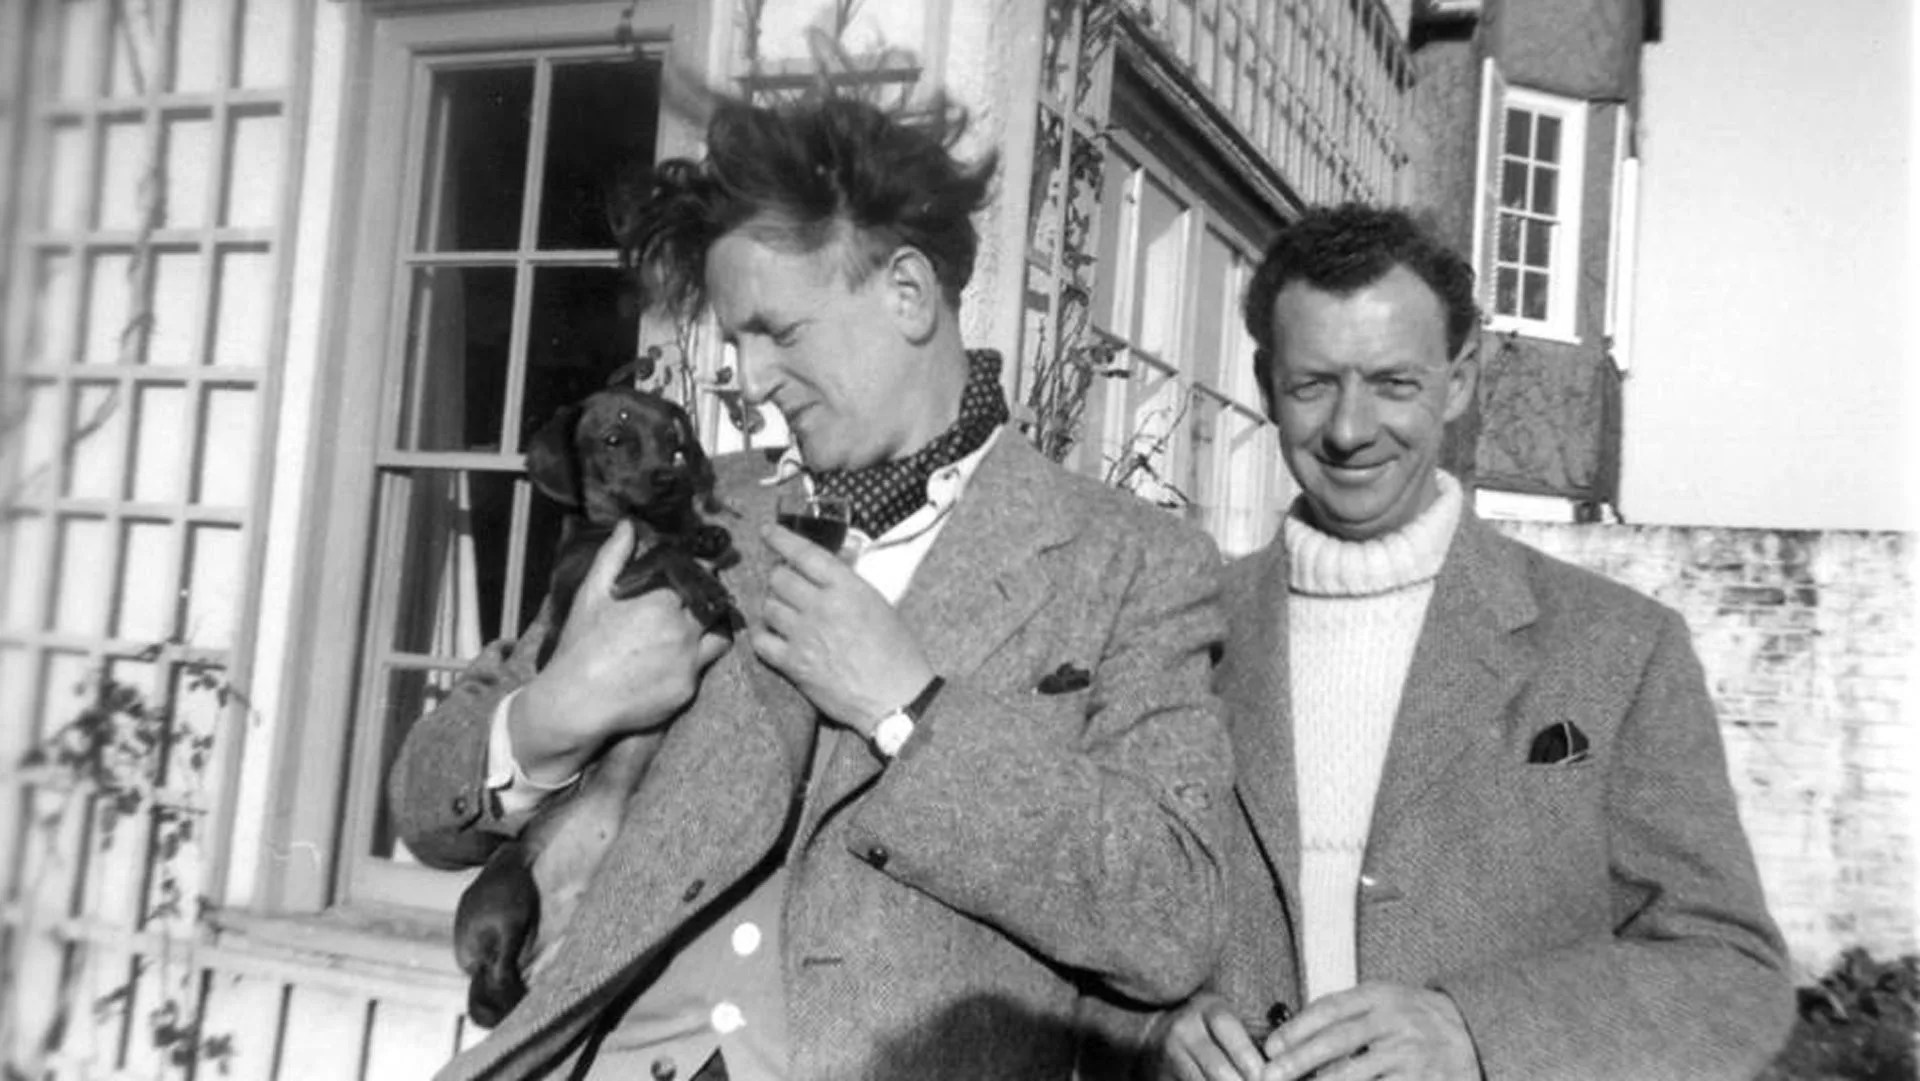 Pears and Britten outside Crag House with their dog Jove as a puppy. Photographer: unknown